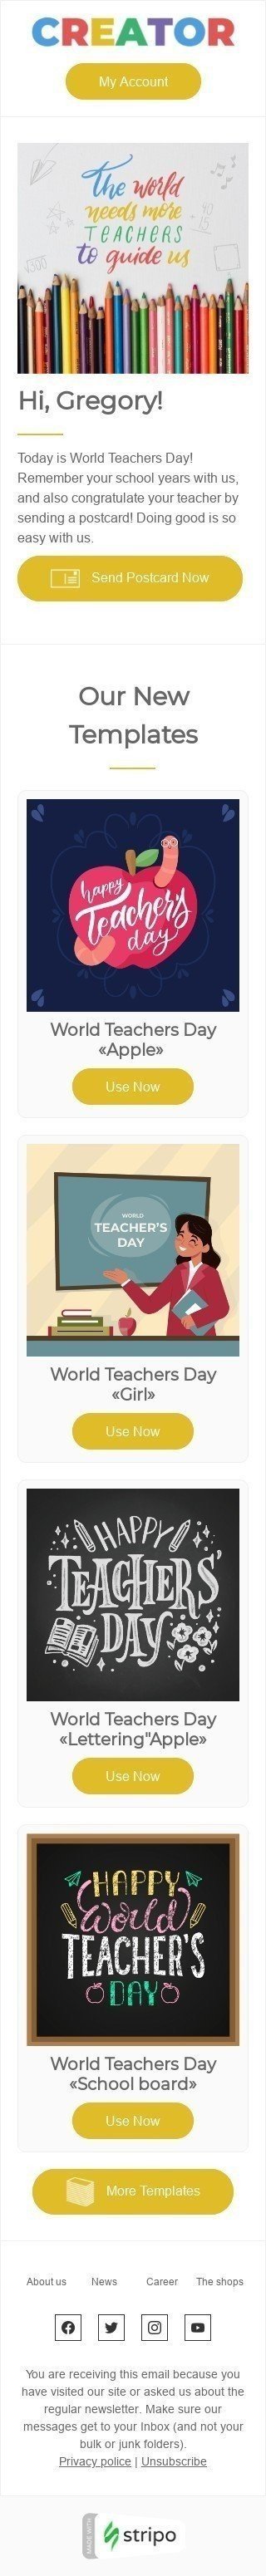 World Teachers' Day Email Template «Creator» for Design industry mobile view